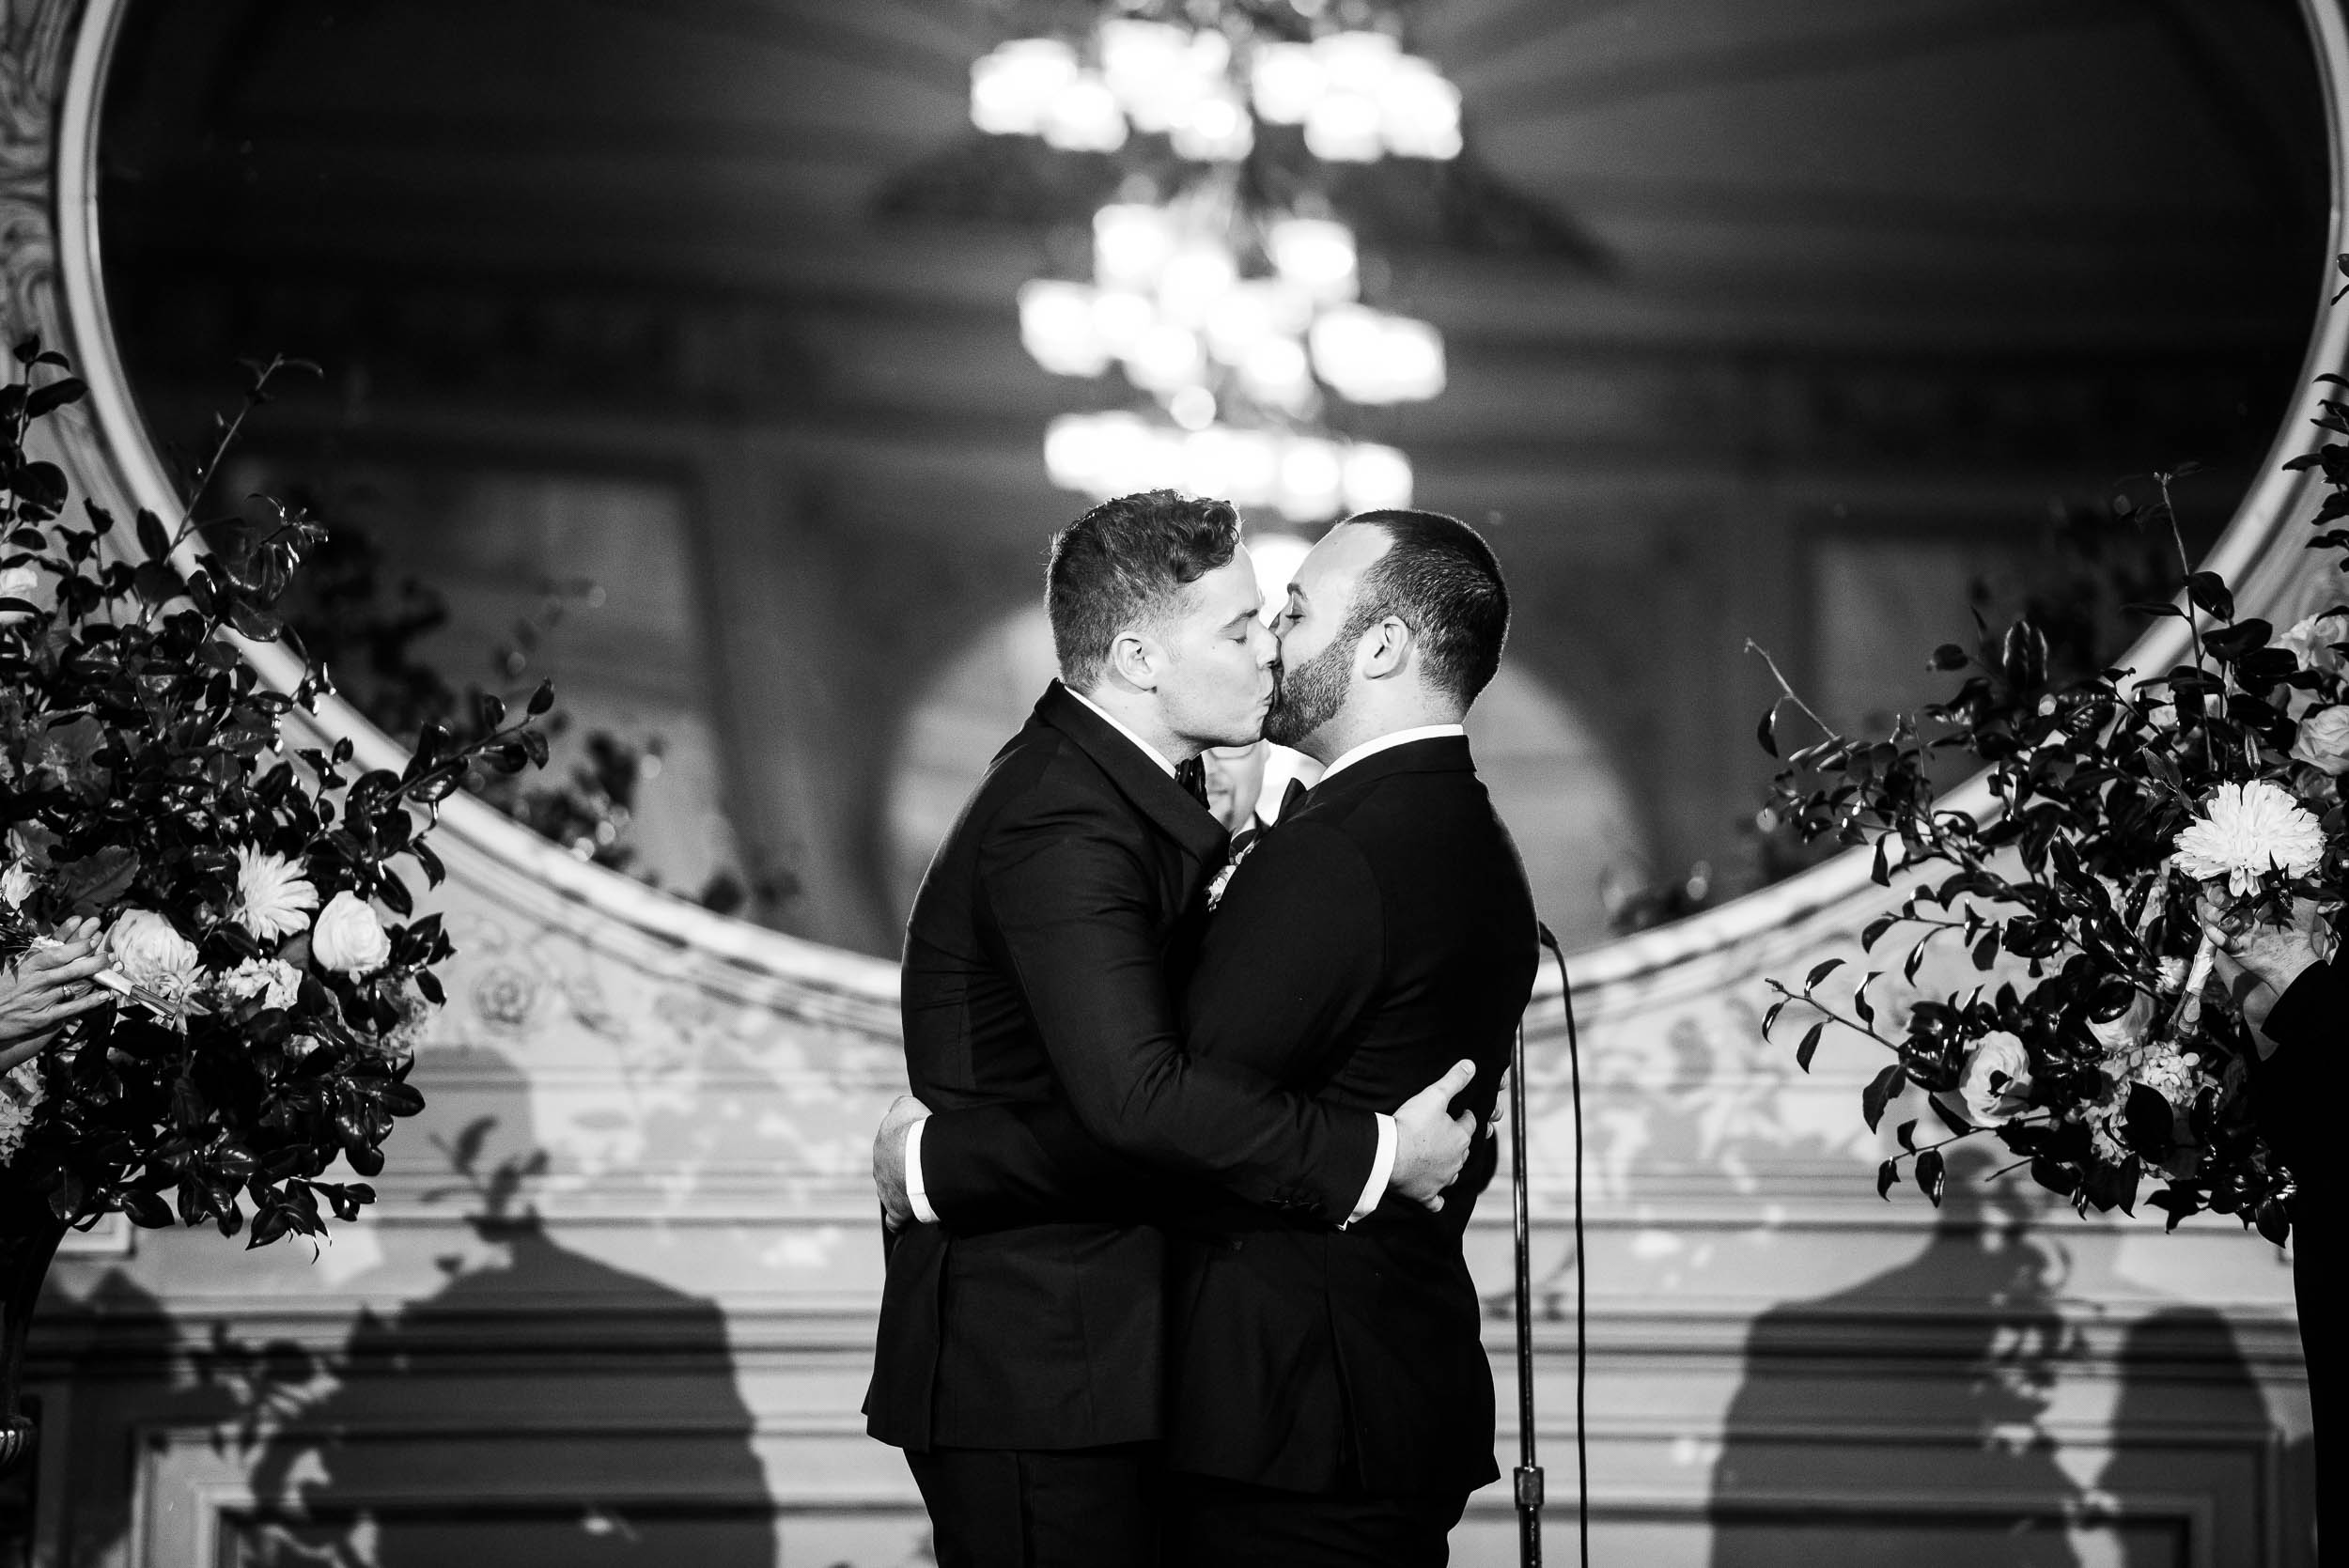 Grooms share a kiss at luxurious fall wedding at the Chicago Symphony Center captured by J. Brown Photography. See more wedding ideas at jbrownphotography.com!